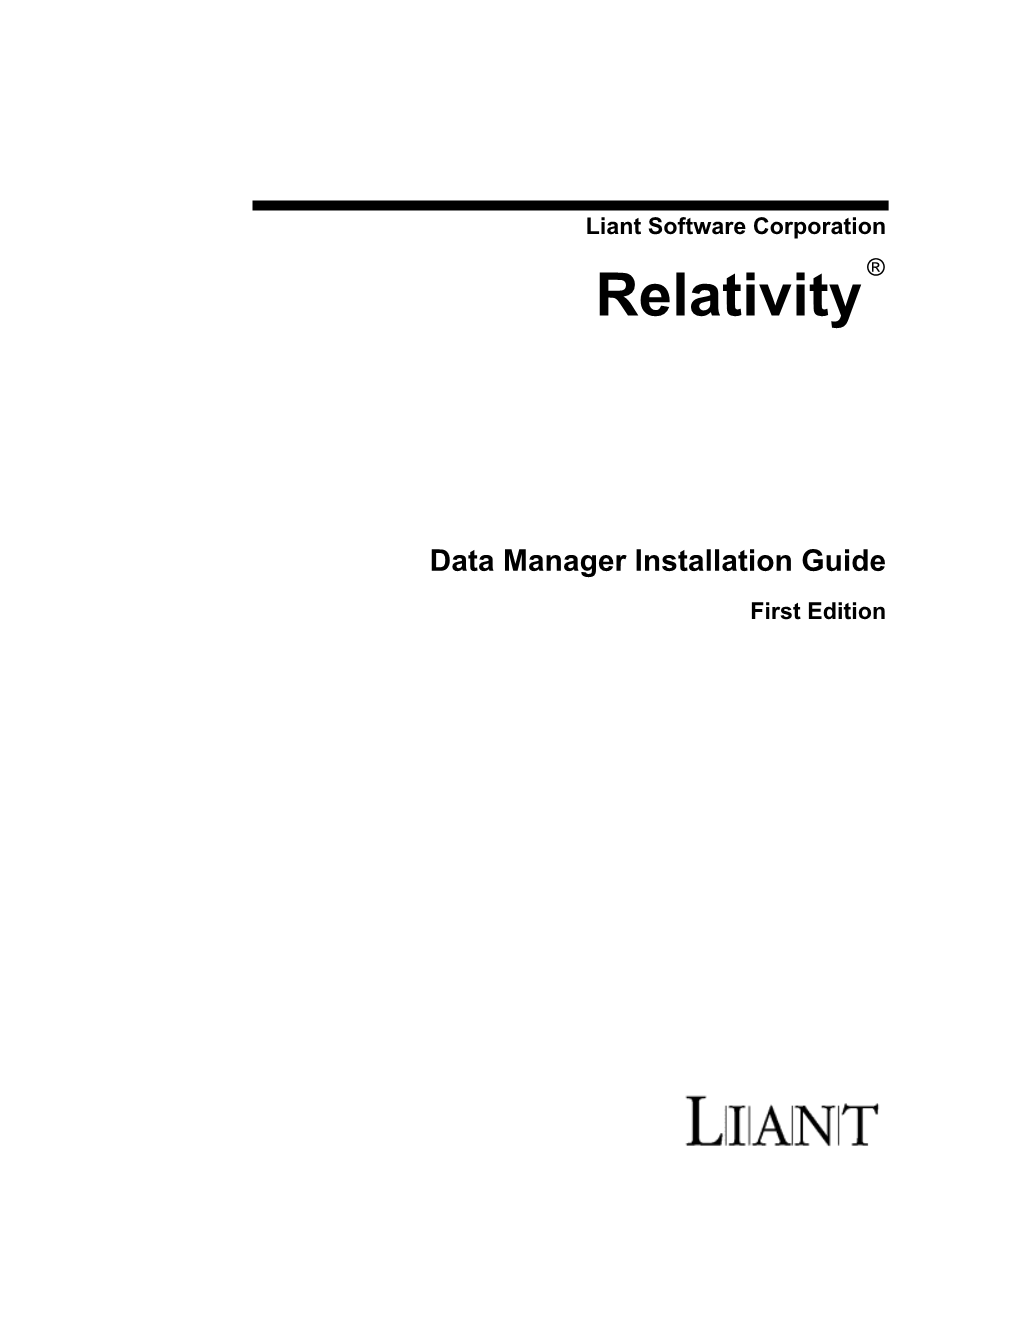 Relativity Data Manager Installation Guide